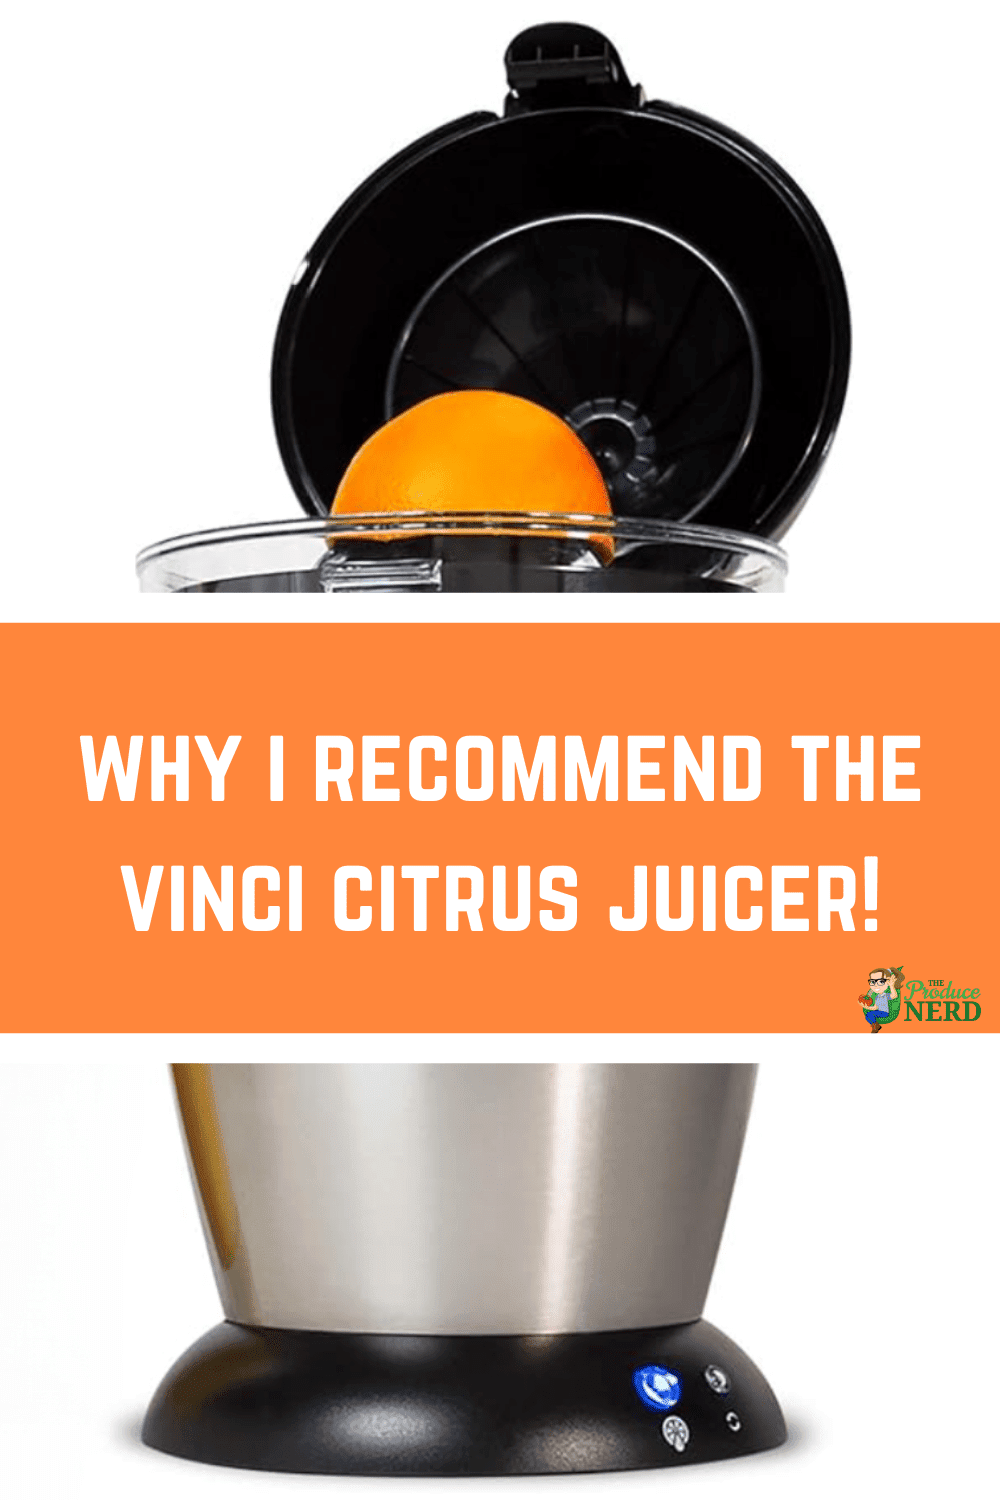 1 - Juicer - Why and What I Recommend